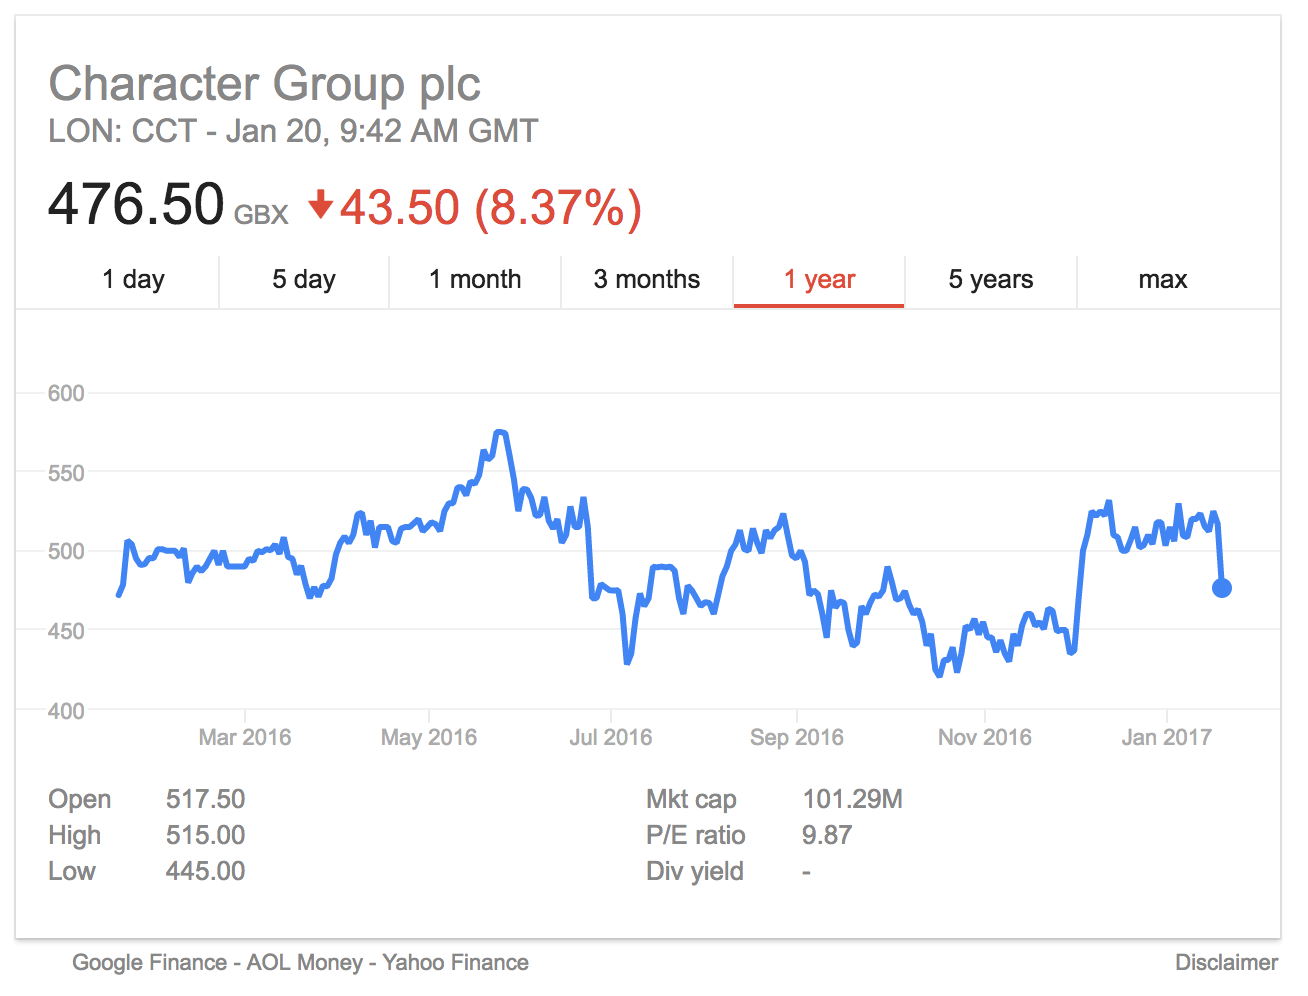 character group share price january 2017 trading update